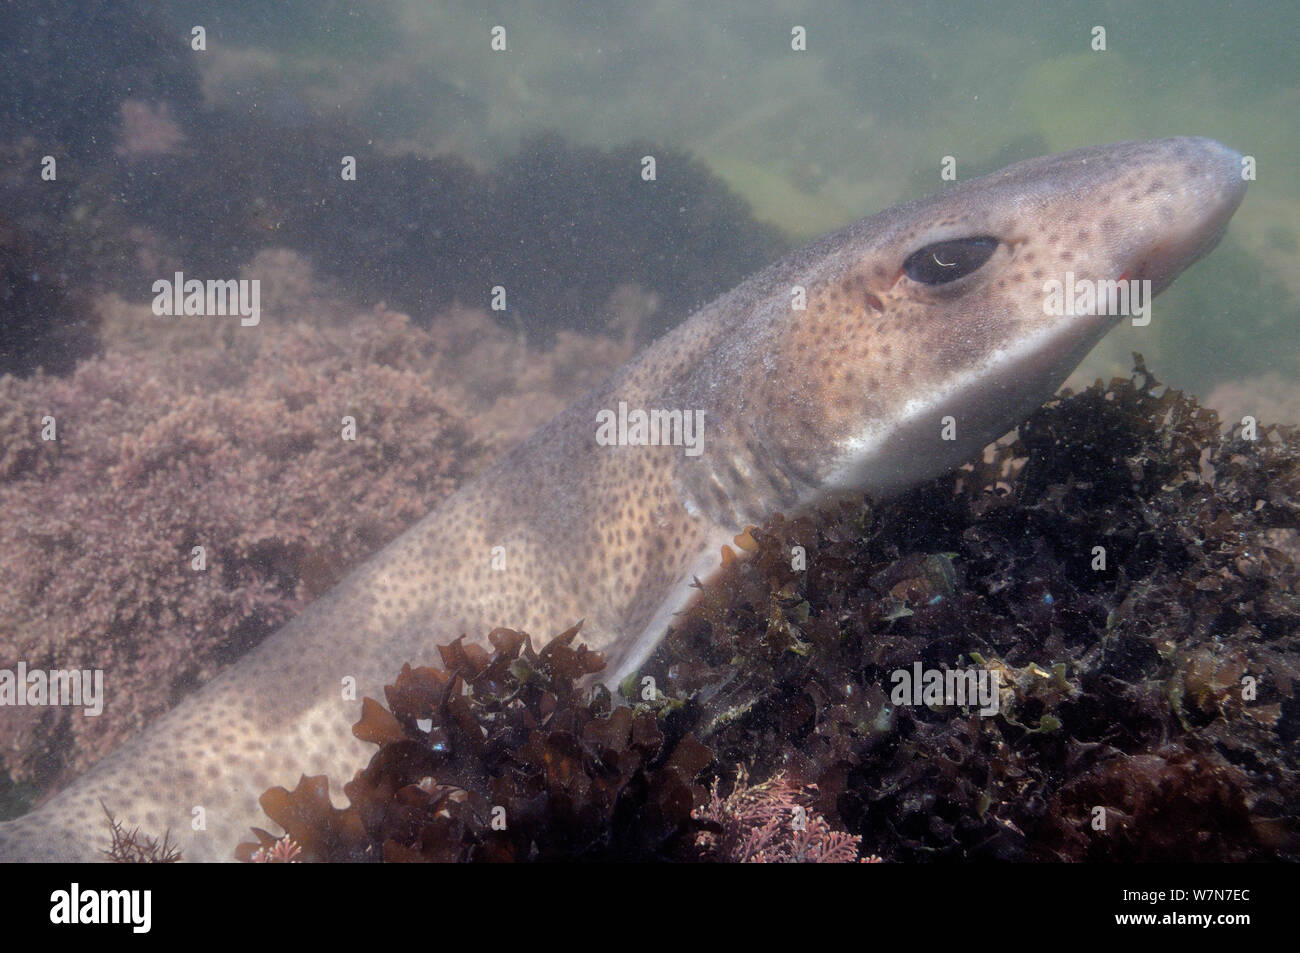 Close up of Lesser spotted catshark / Dogfish (Scyliorhinus canicula) resting on floor of a rockpool among Irish moss / Carrageen (Chondrus crispus) and Coralweed (Corallina officinalis). Rhossili, The Gower peninsula, UK, July. Stock Photo